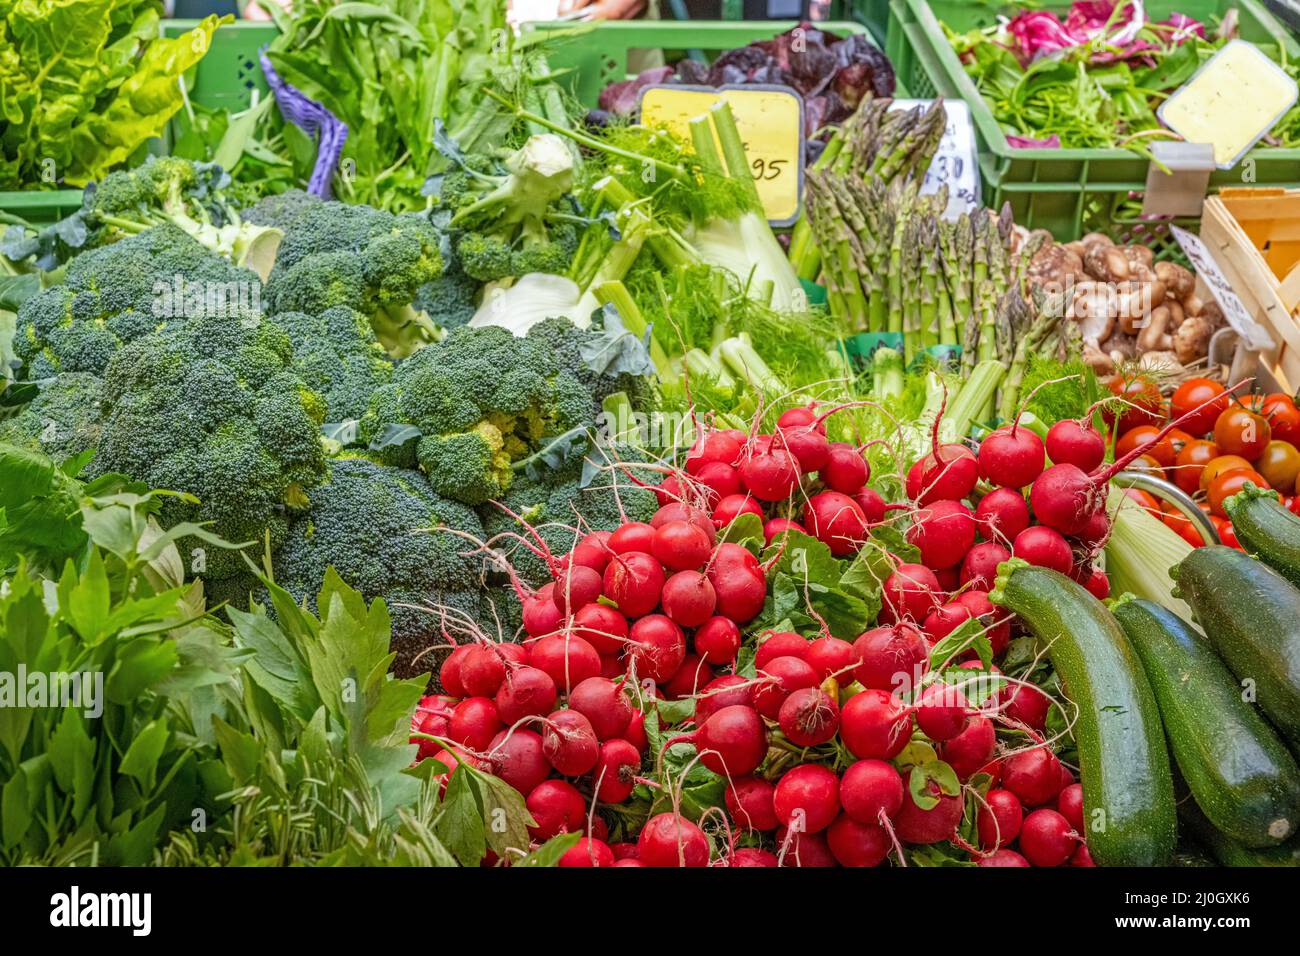 Salad and vegetables for sale at a market Stock Photo